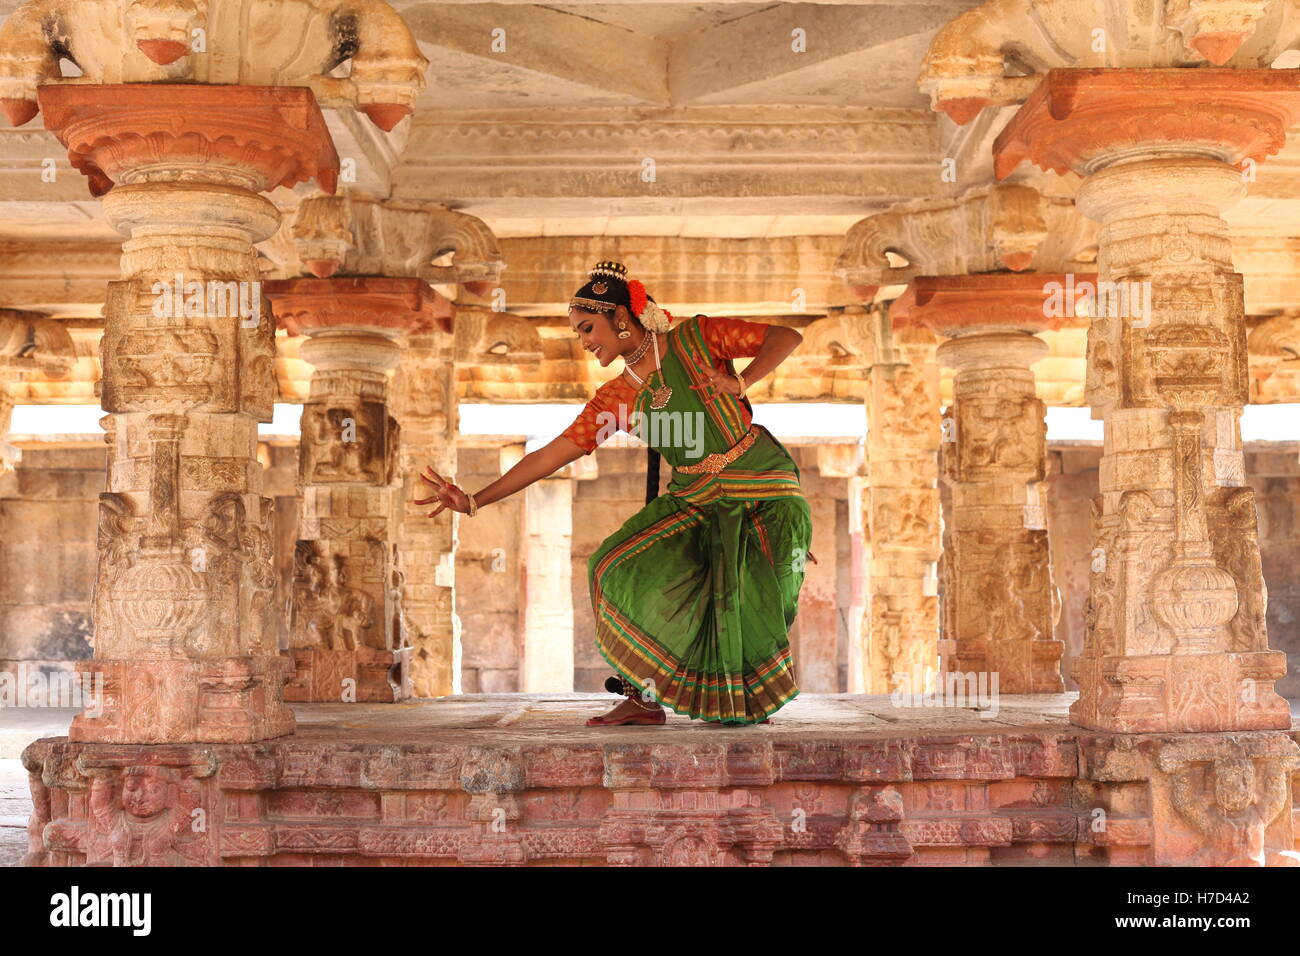 kuchipudi is one of the eight classical dance forms of india,from ...